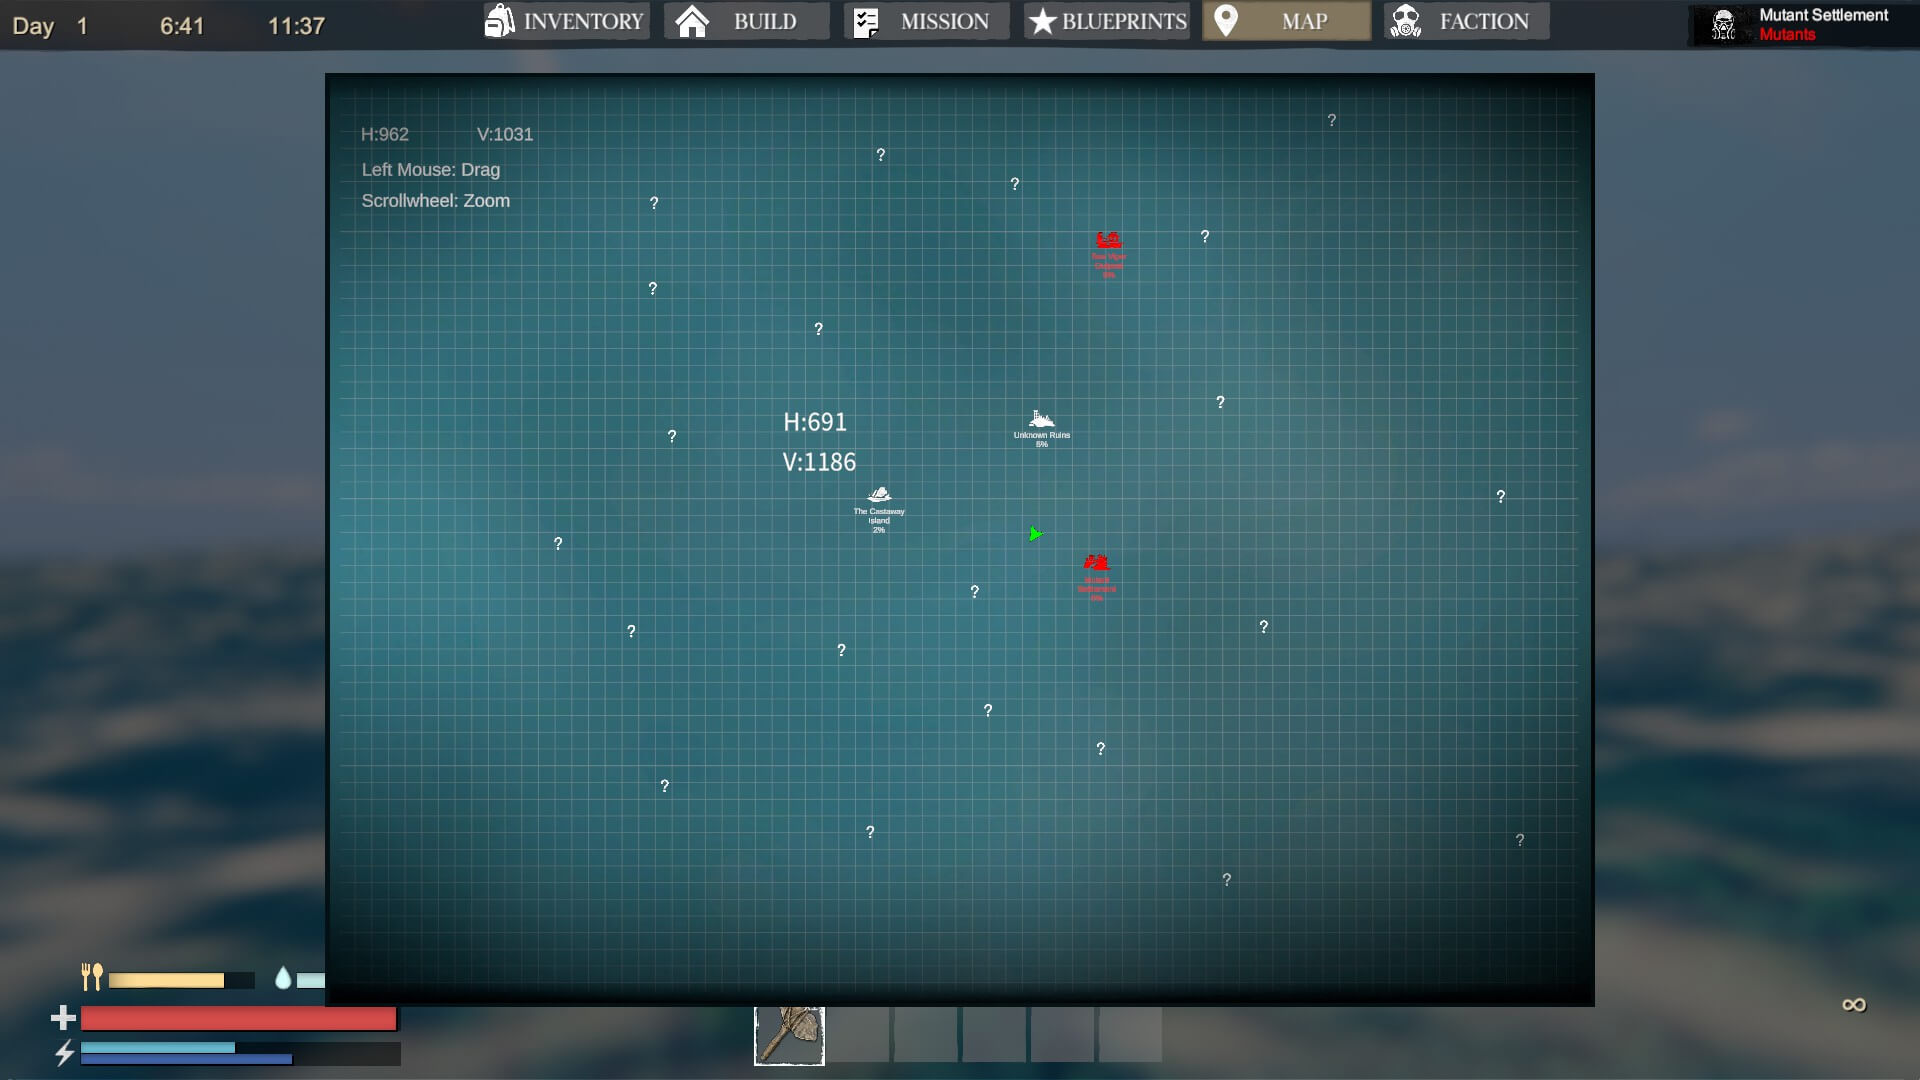 The in-game map that displays undiscovered locations with a question mark. Discovered areas will have a percentage of how much resources are left. Enemy occupied areas are shown red instead of white.